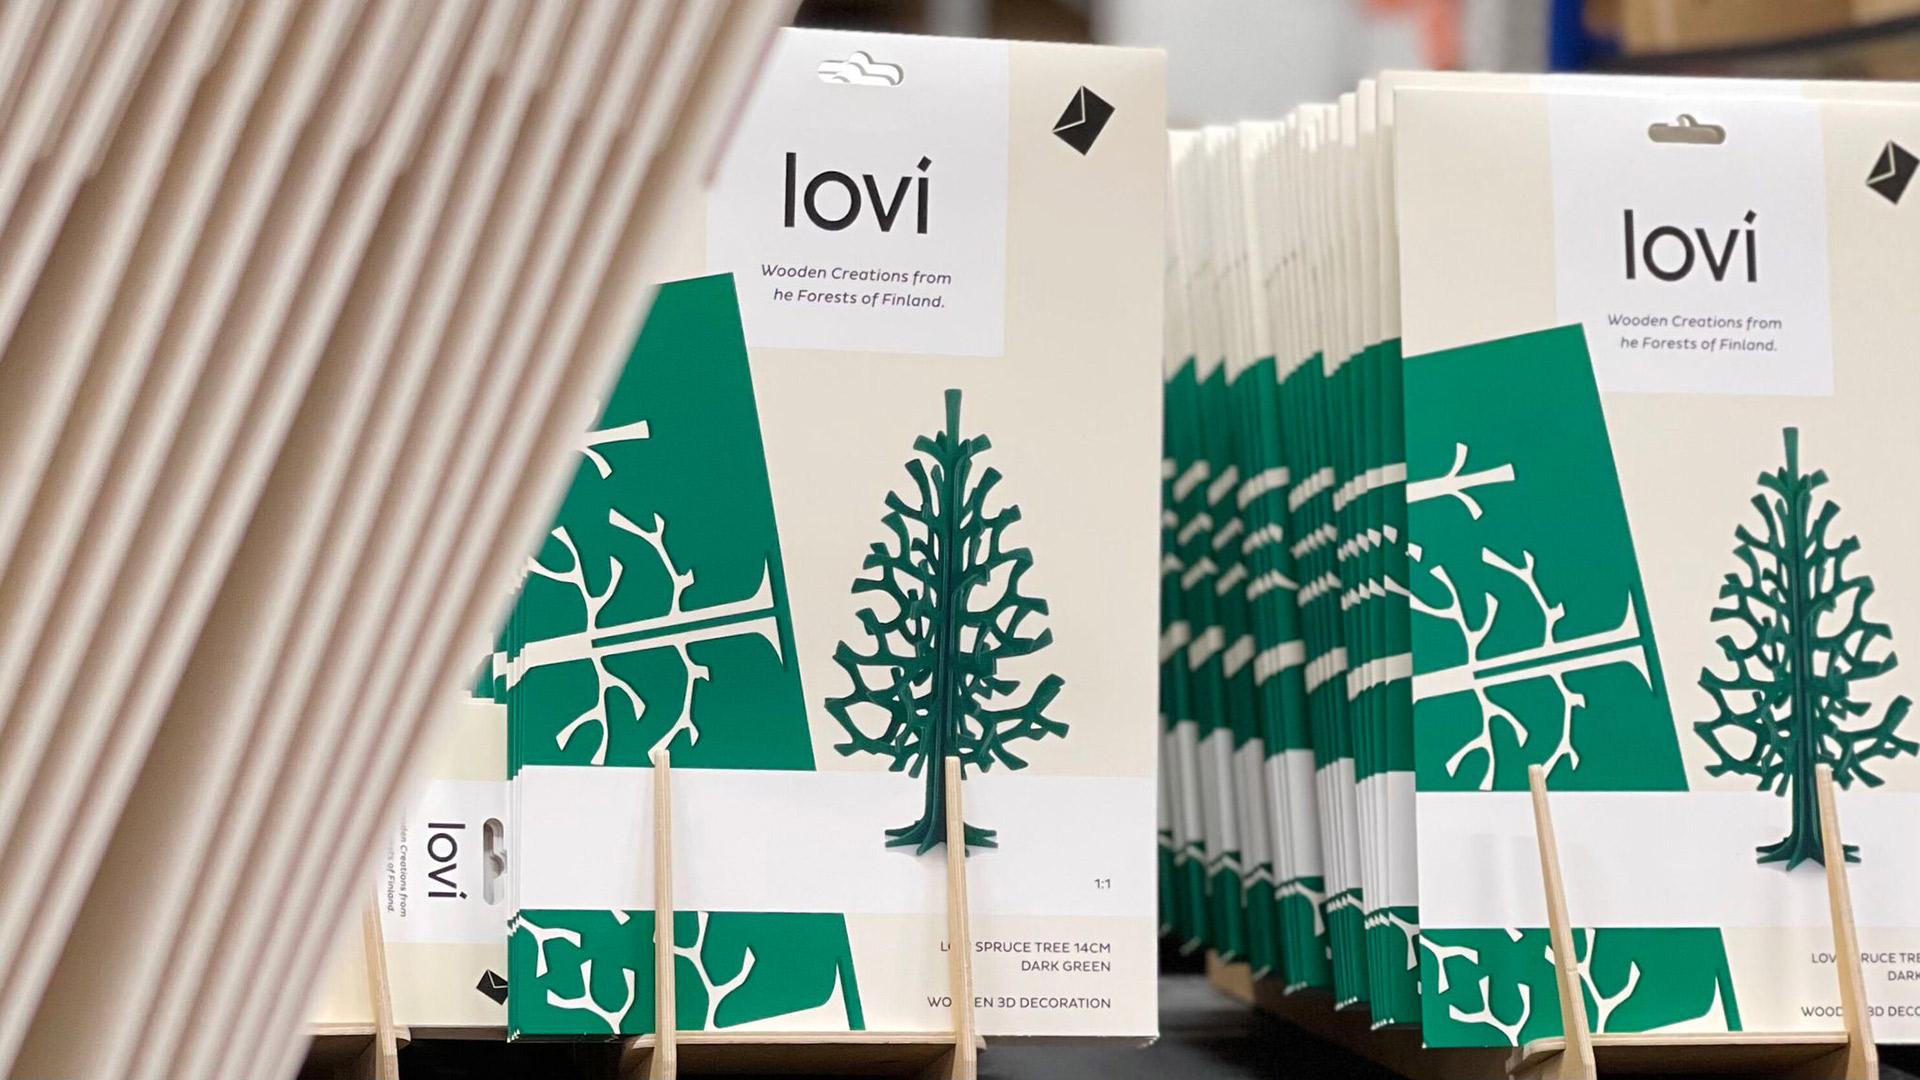 Lovi Spruce packages, size 14cm